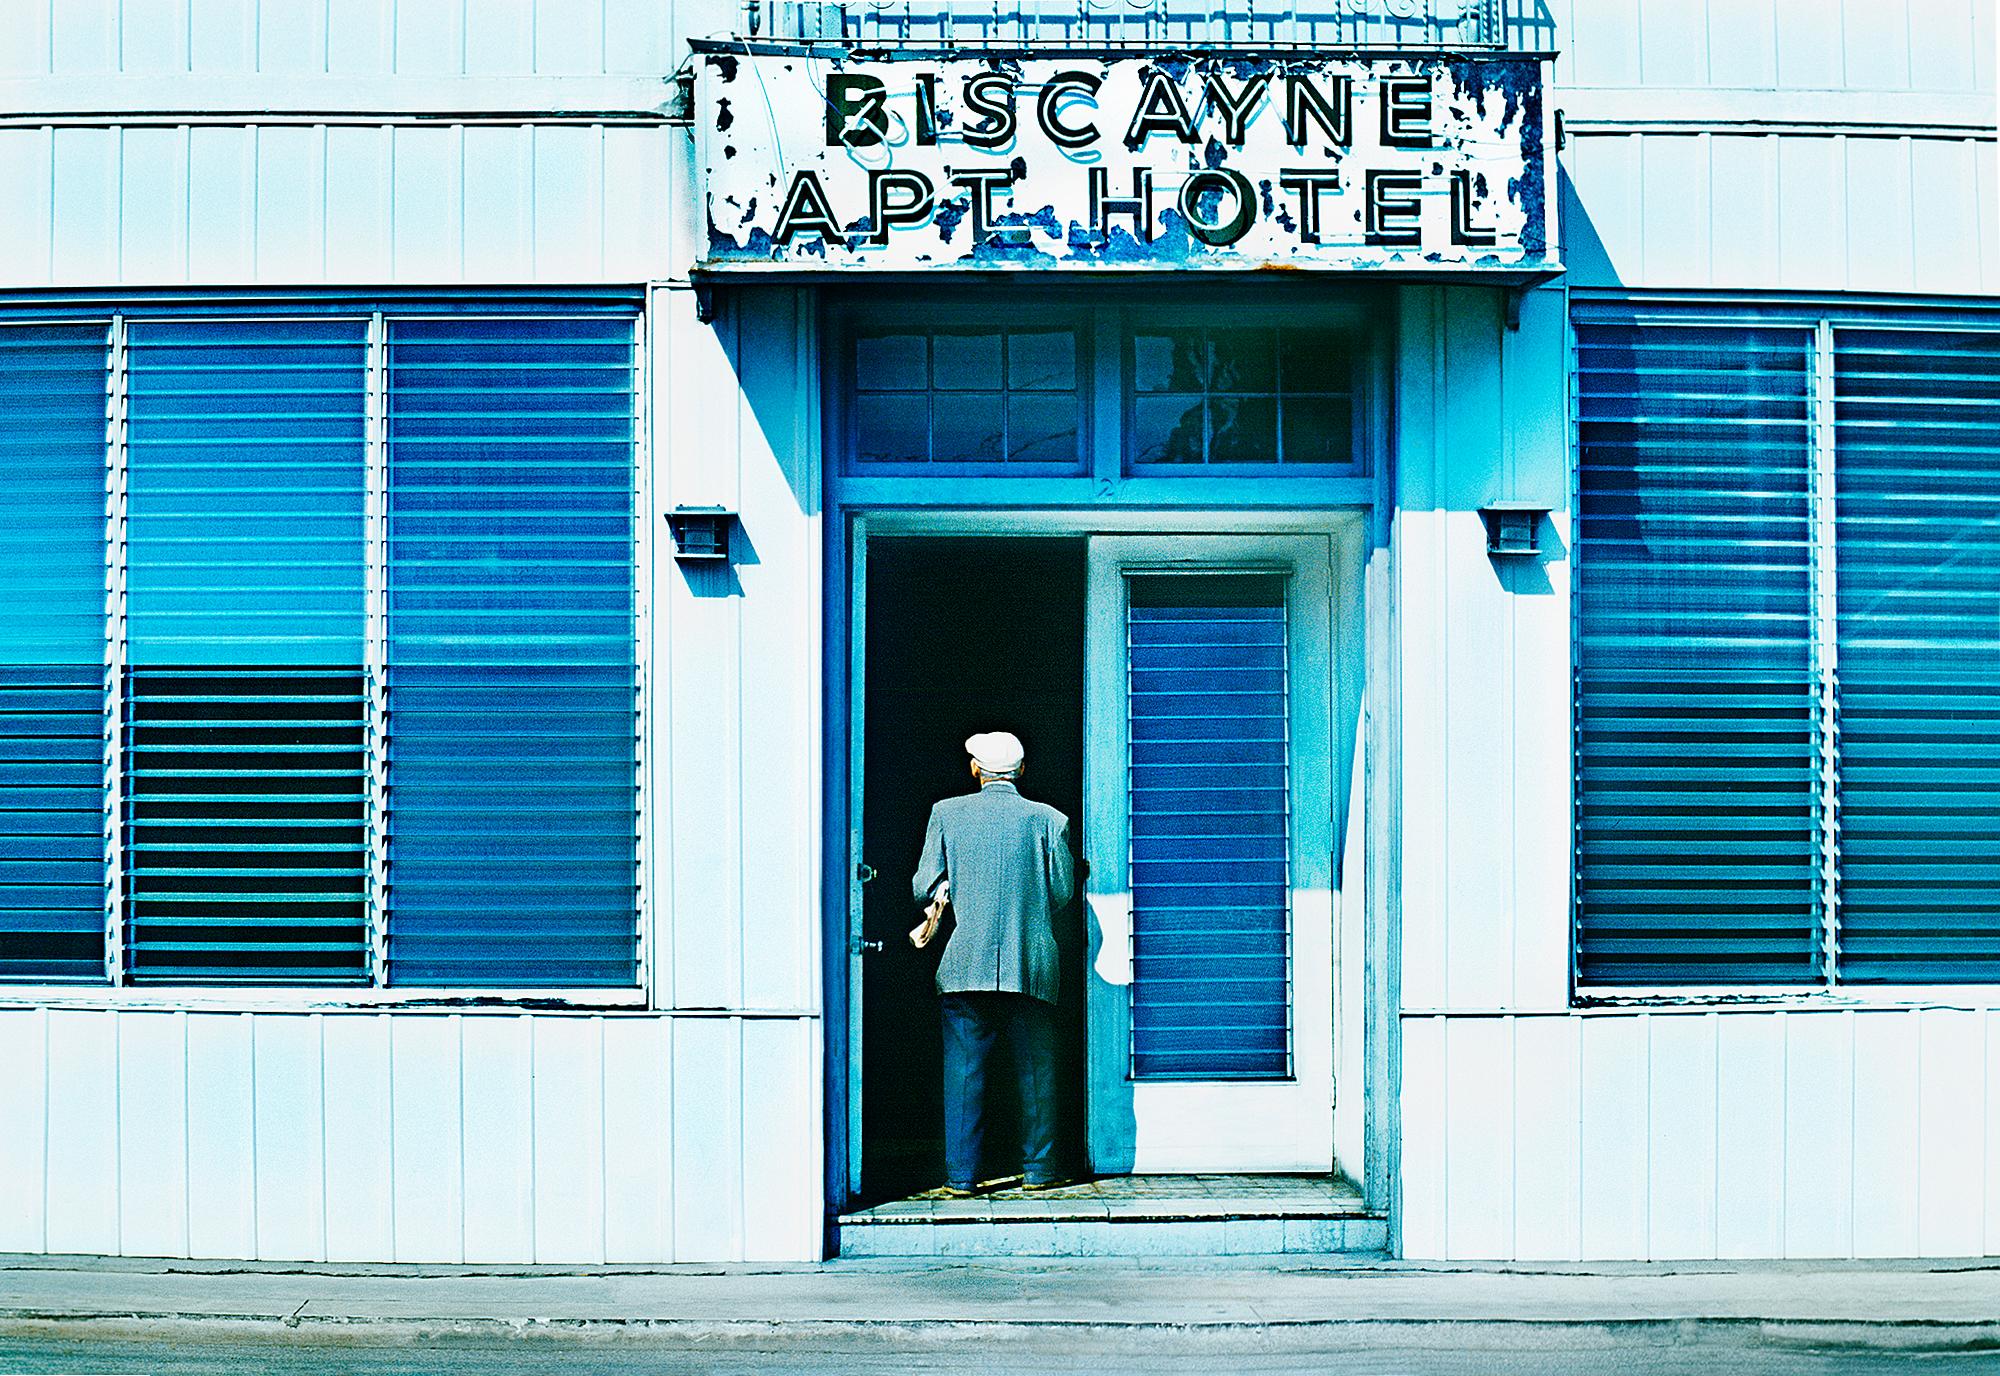 Mitchell Funk Portrait Photograph - South Beach in the 1970s. Old Man Walking Enters Building - Old Miami Beach